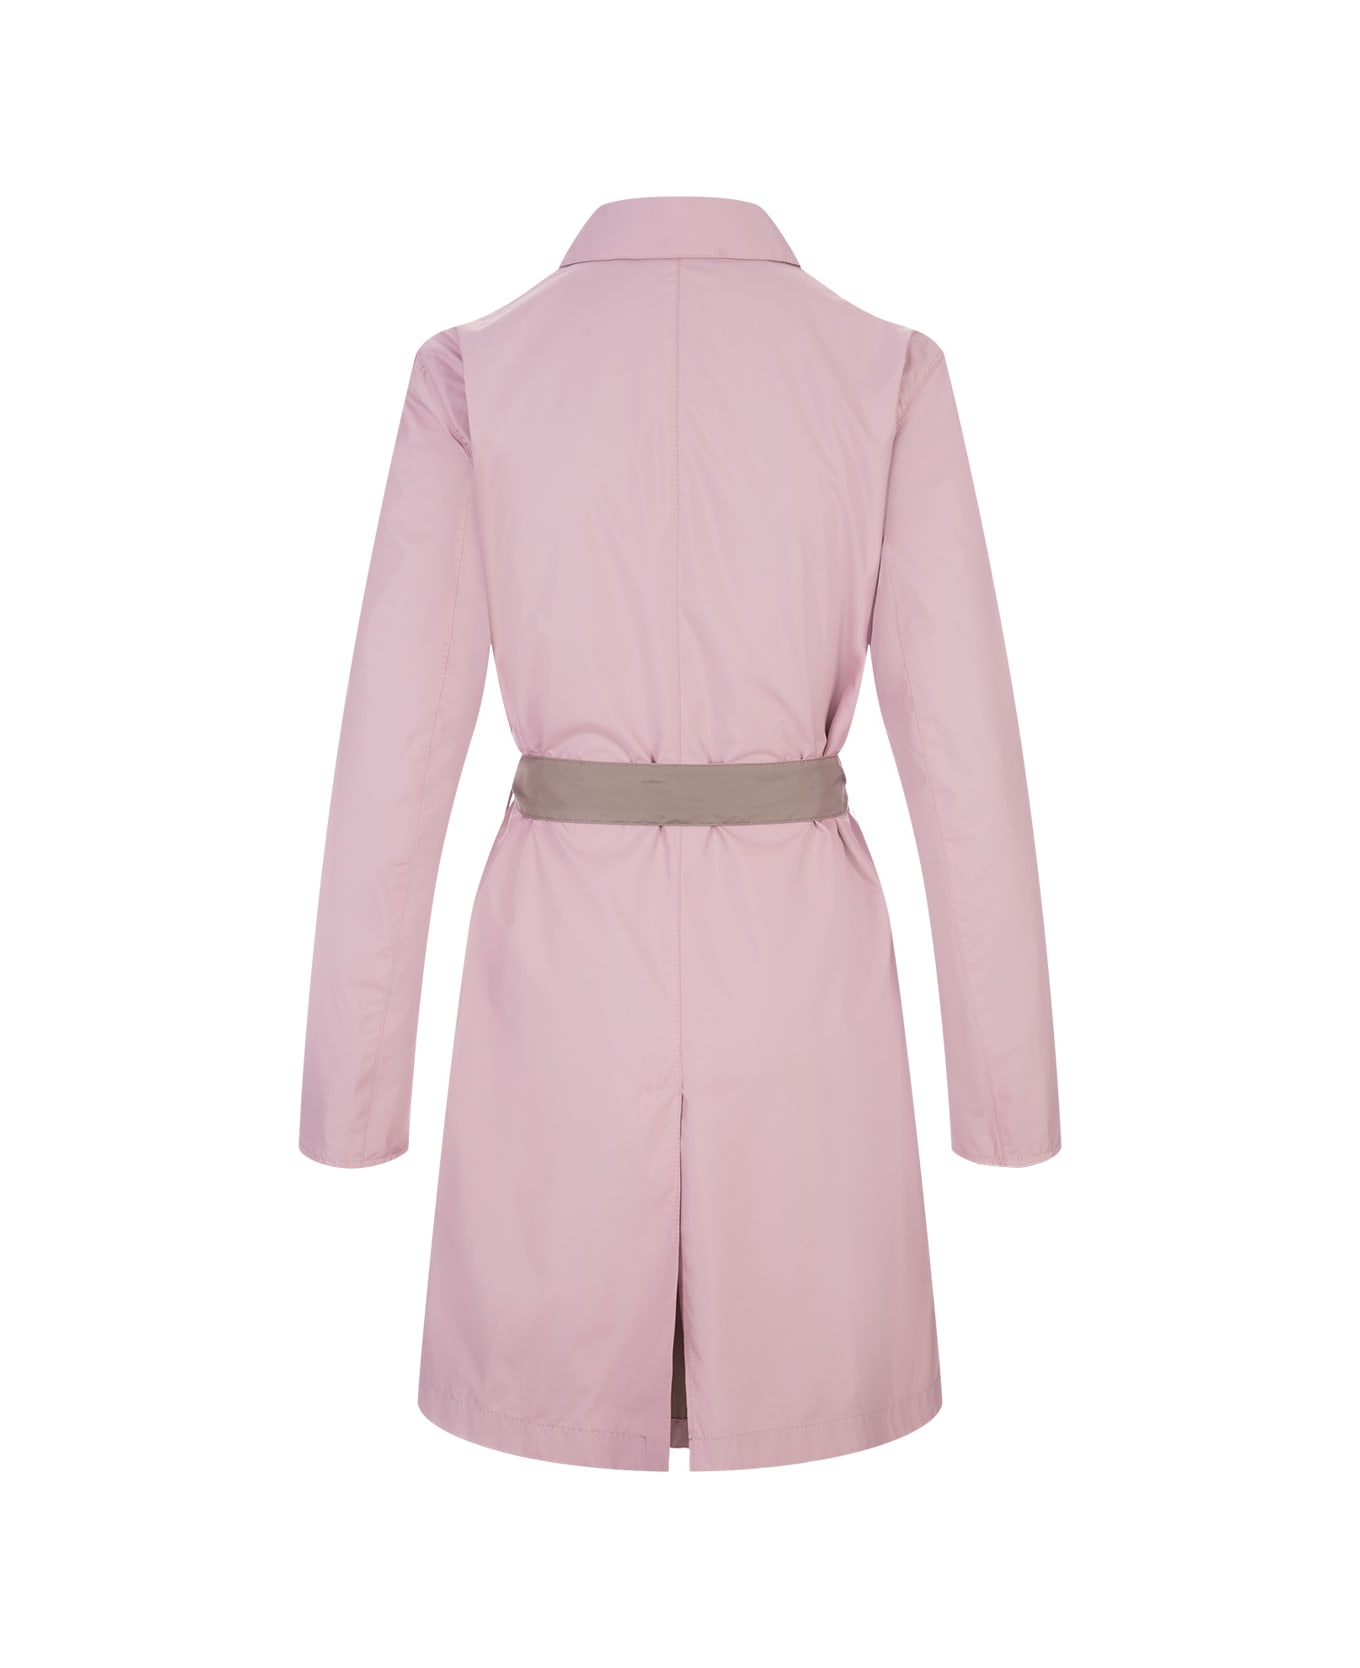 Kiton Pink And Sand Reversible Trench Coat - Pink